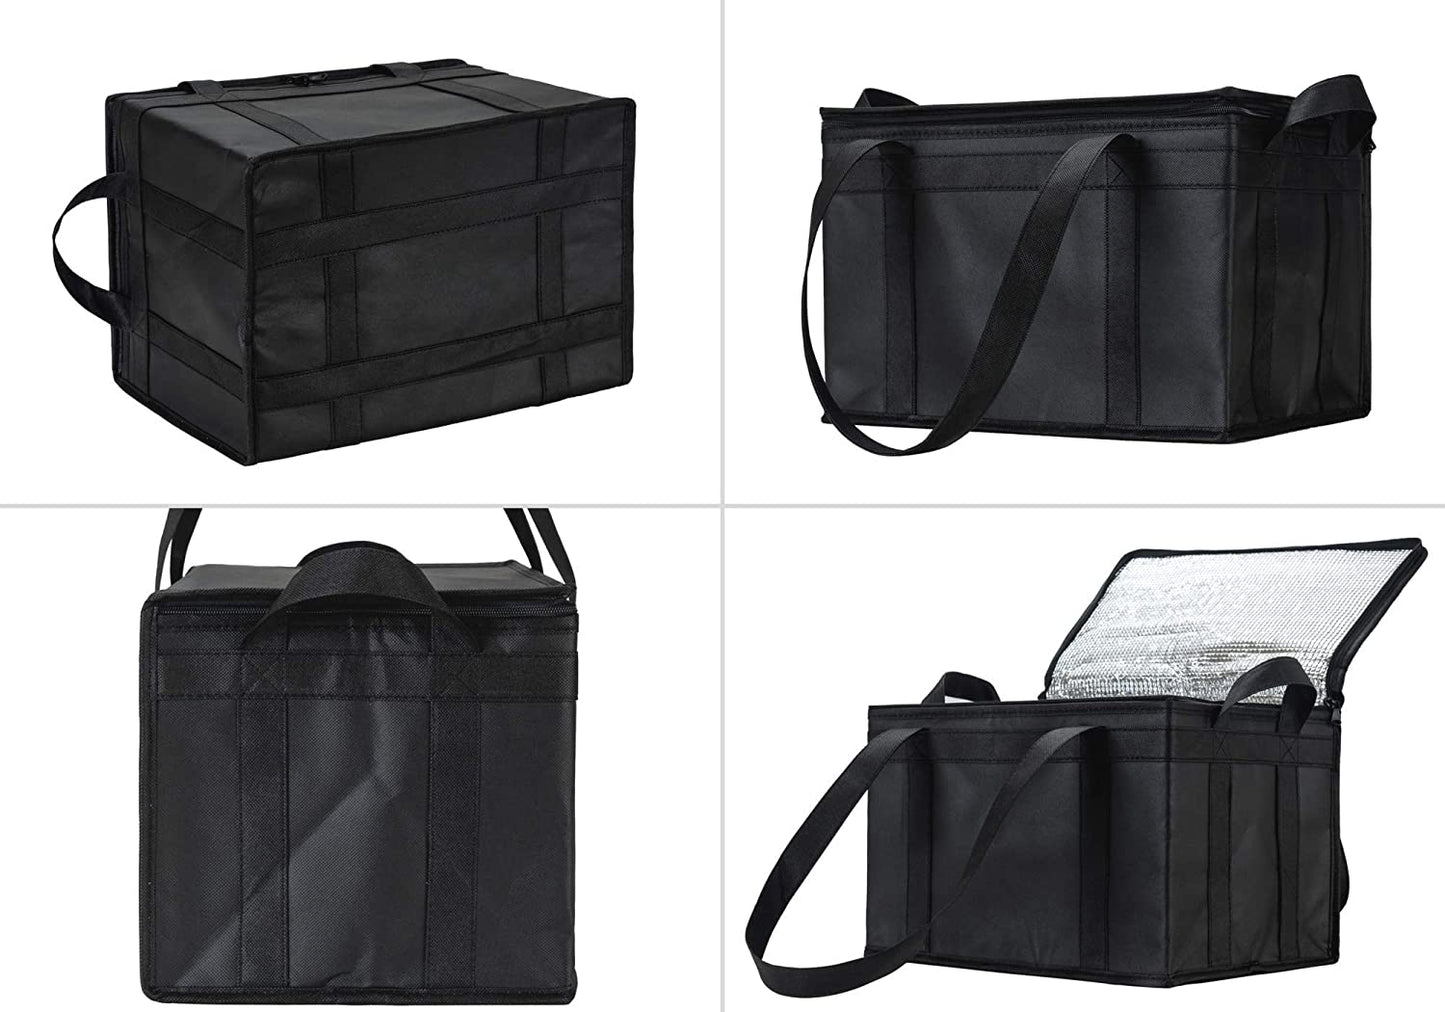 NZ Home Insulated Grocery Bag Large Heavy Duty, Strengthened Side Handles, Collapsible, Washable, Stands Upright, EZ Pack, Dual Sliders Zipper, Completely Reinforced Bottom & Handles (2 Pack, Black) - (For 8 piece(s))